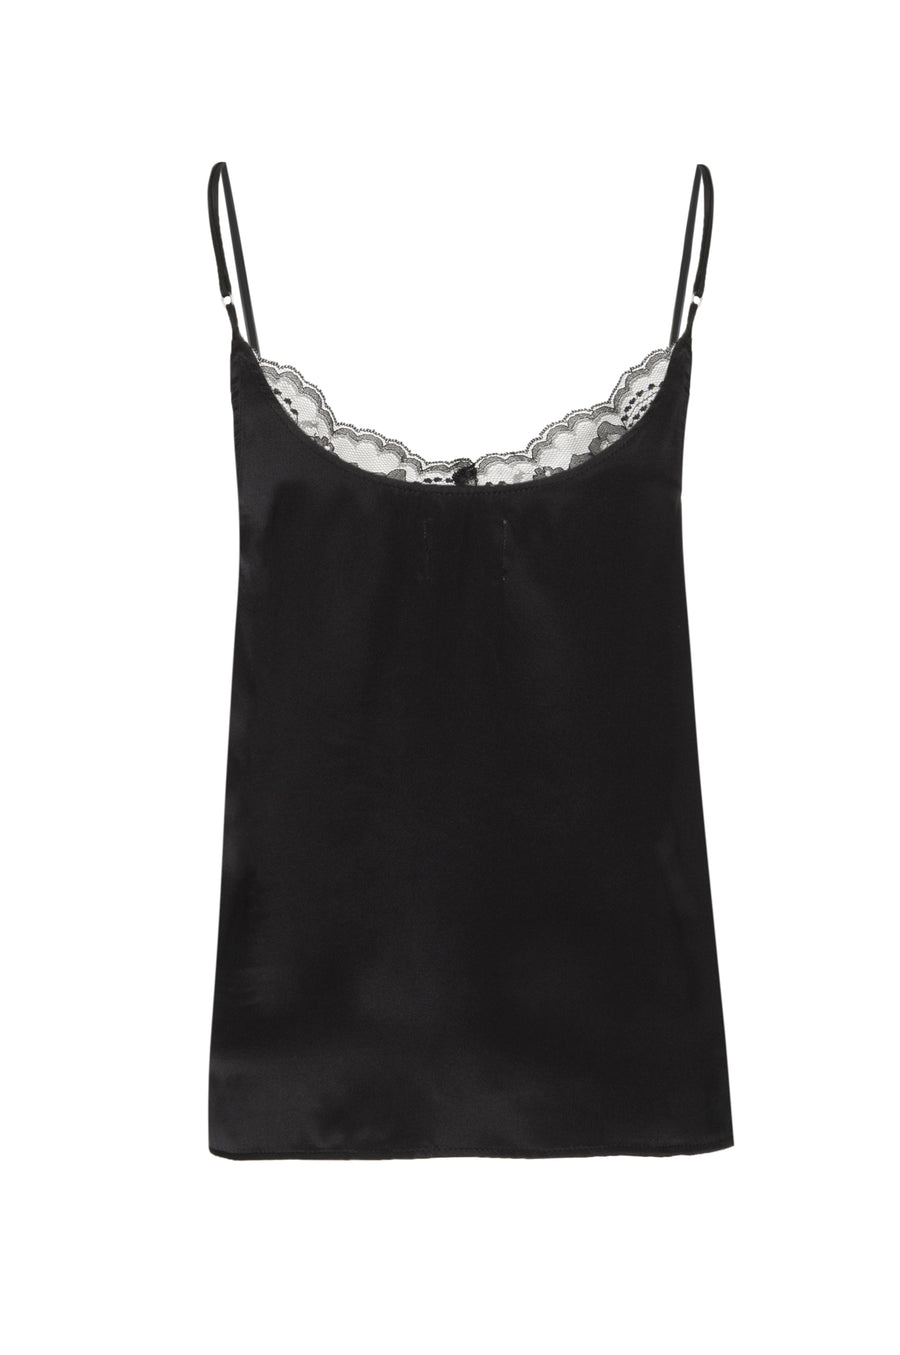 Silk Charmeuse 'August' Tank with Lace: Black